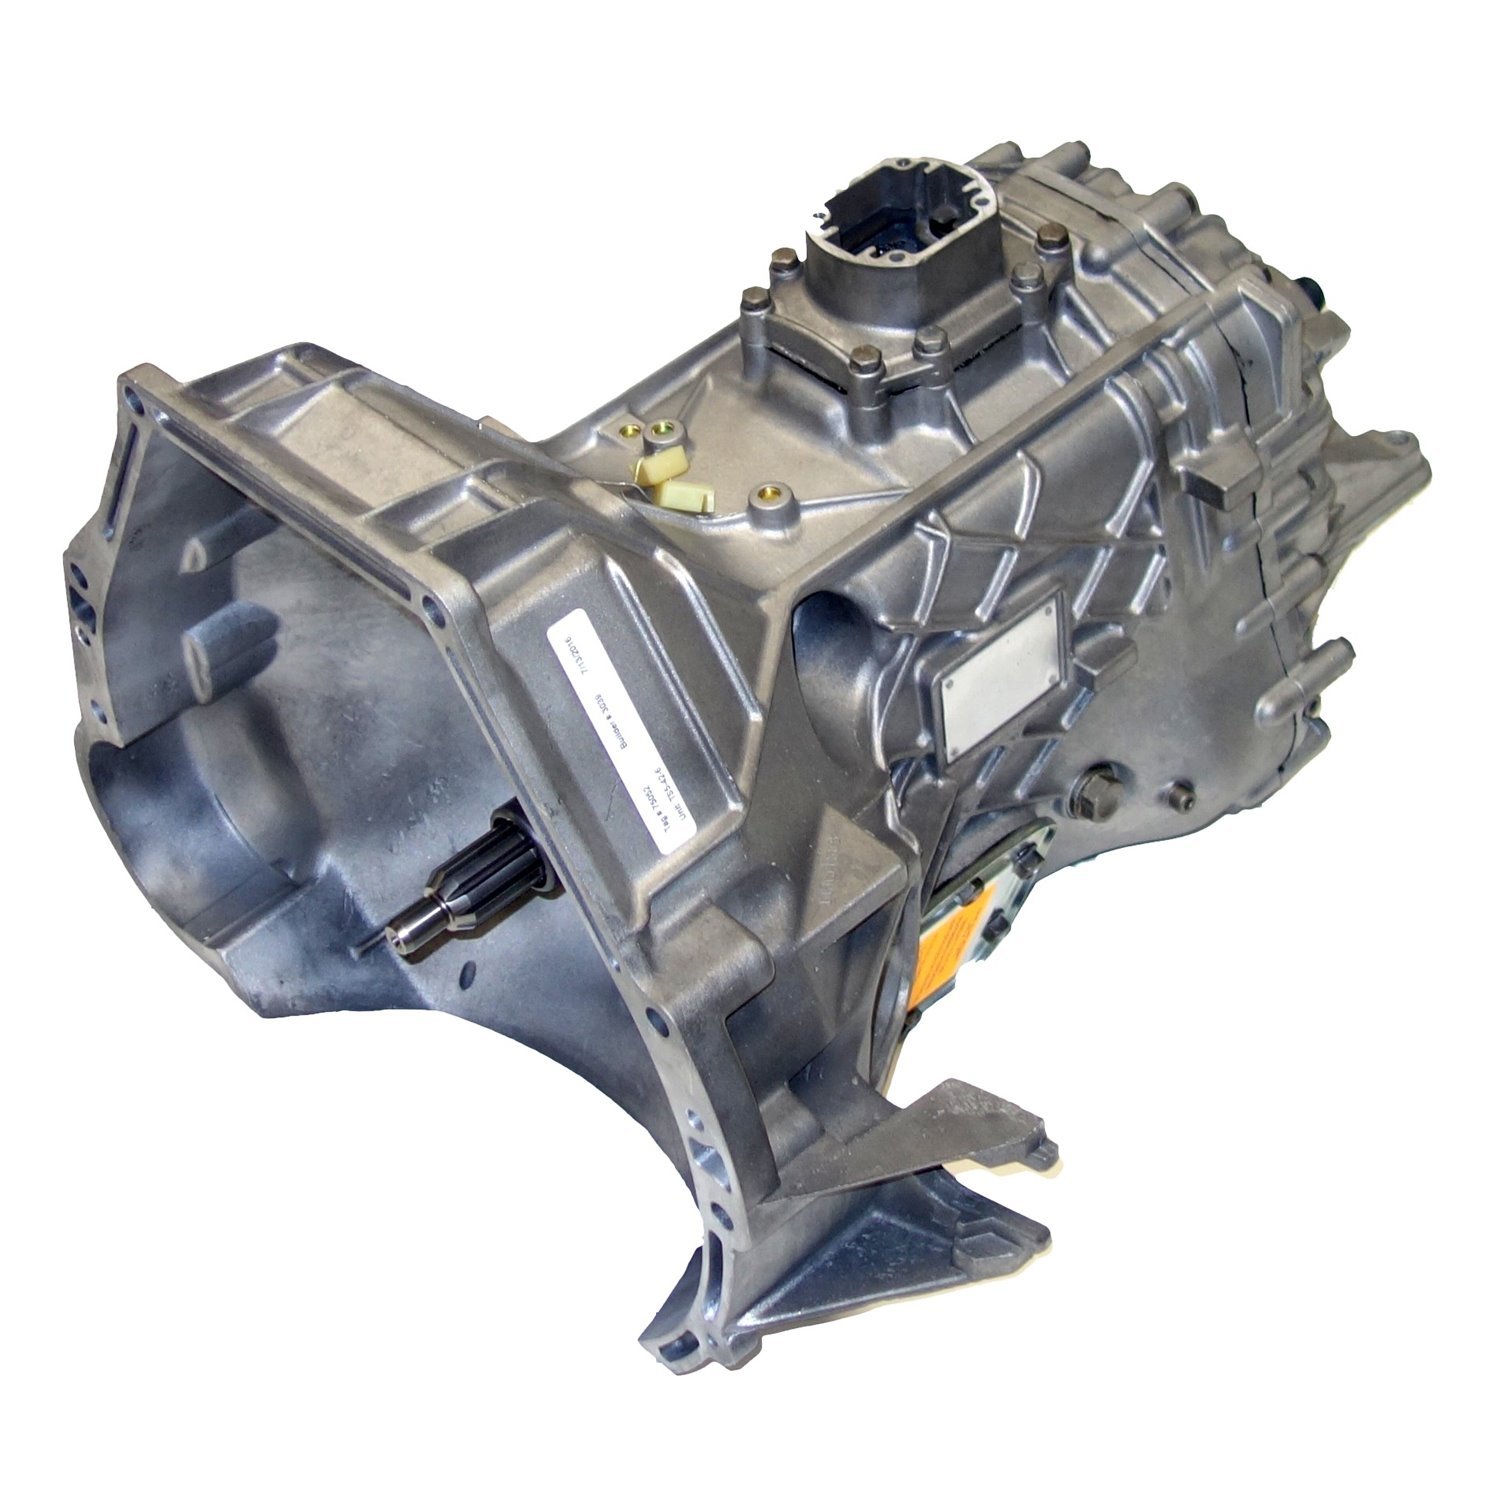 Remanufactured S5-42 Manual Transmission for Ford 87-92 F-series 4.9L & 5.8L, 5 Speed